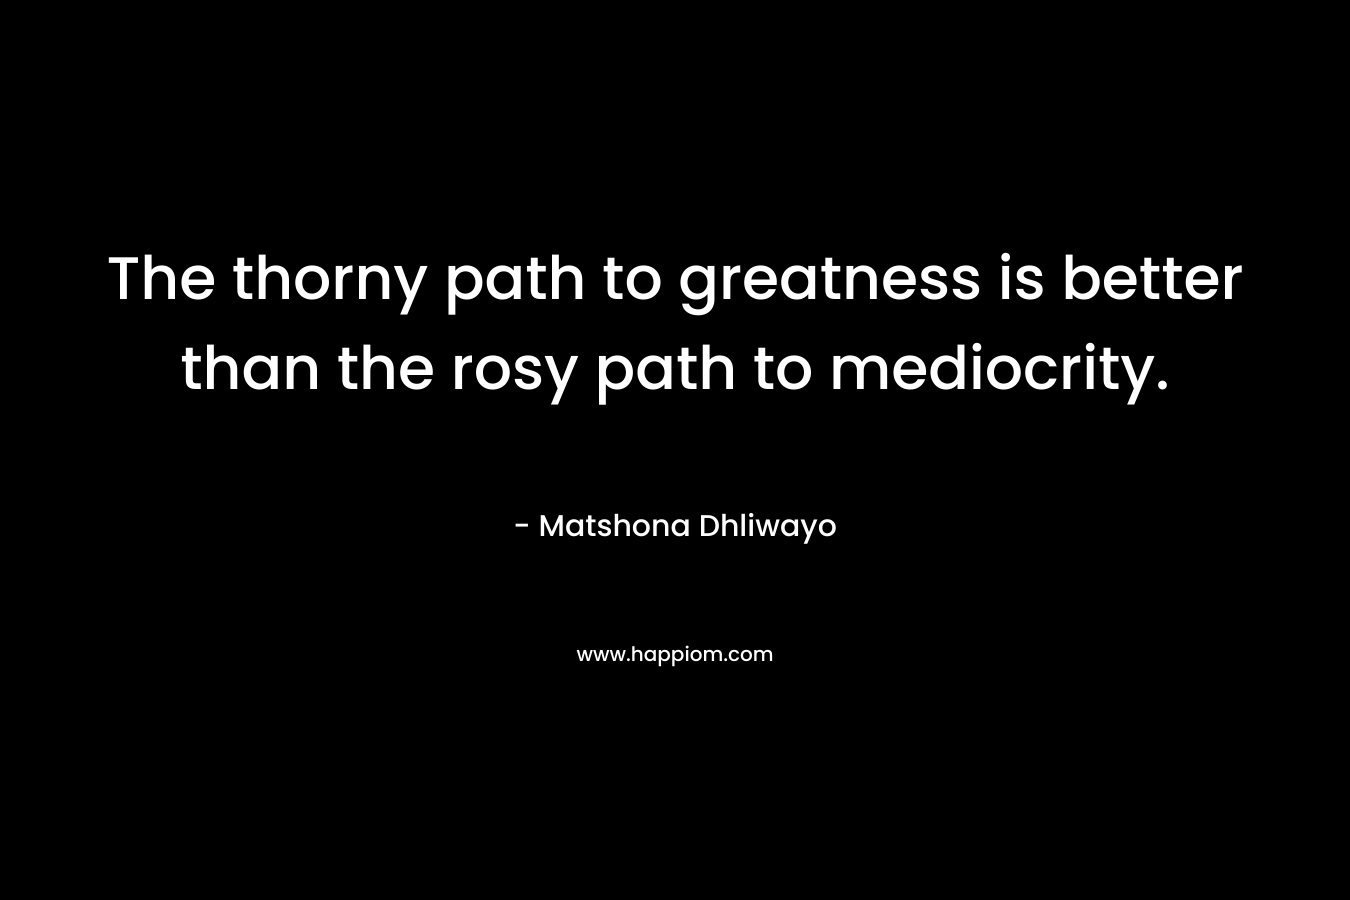 The thorny path to greatness is better than the rosy path to mediocrity.